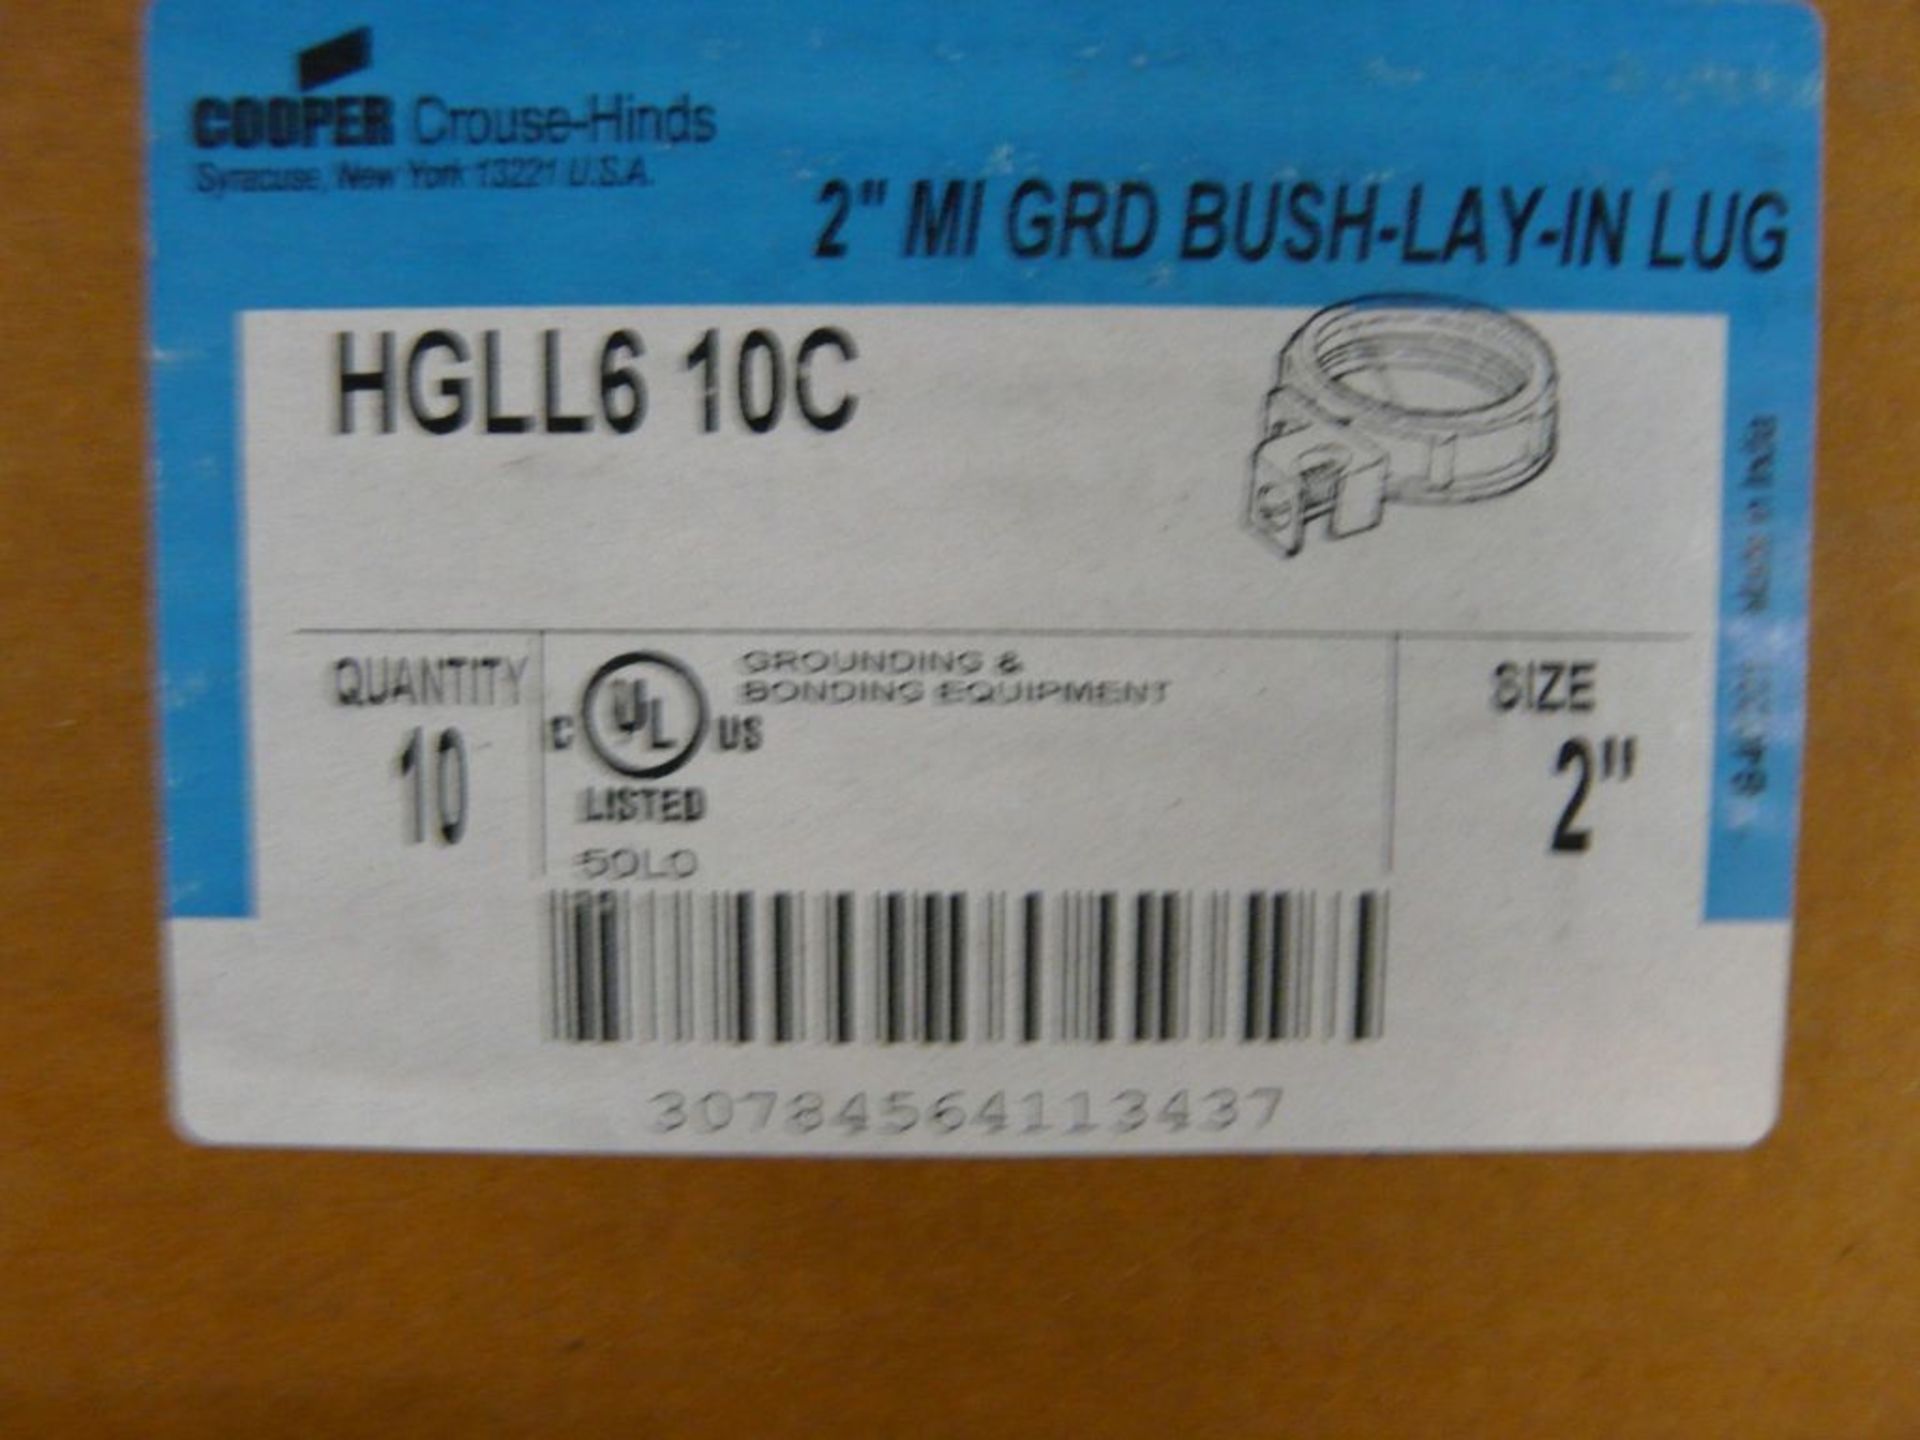 Lot of Approx (750) Cooper 2" Ground Bushing Lay in Lugs | Part No. HGLL610C; New Surplus - Image 3 of 5